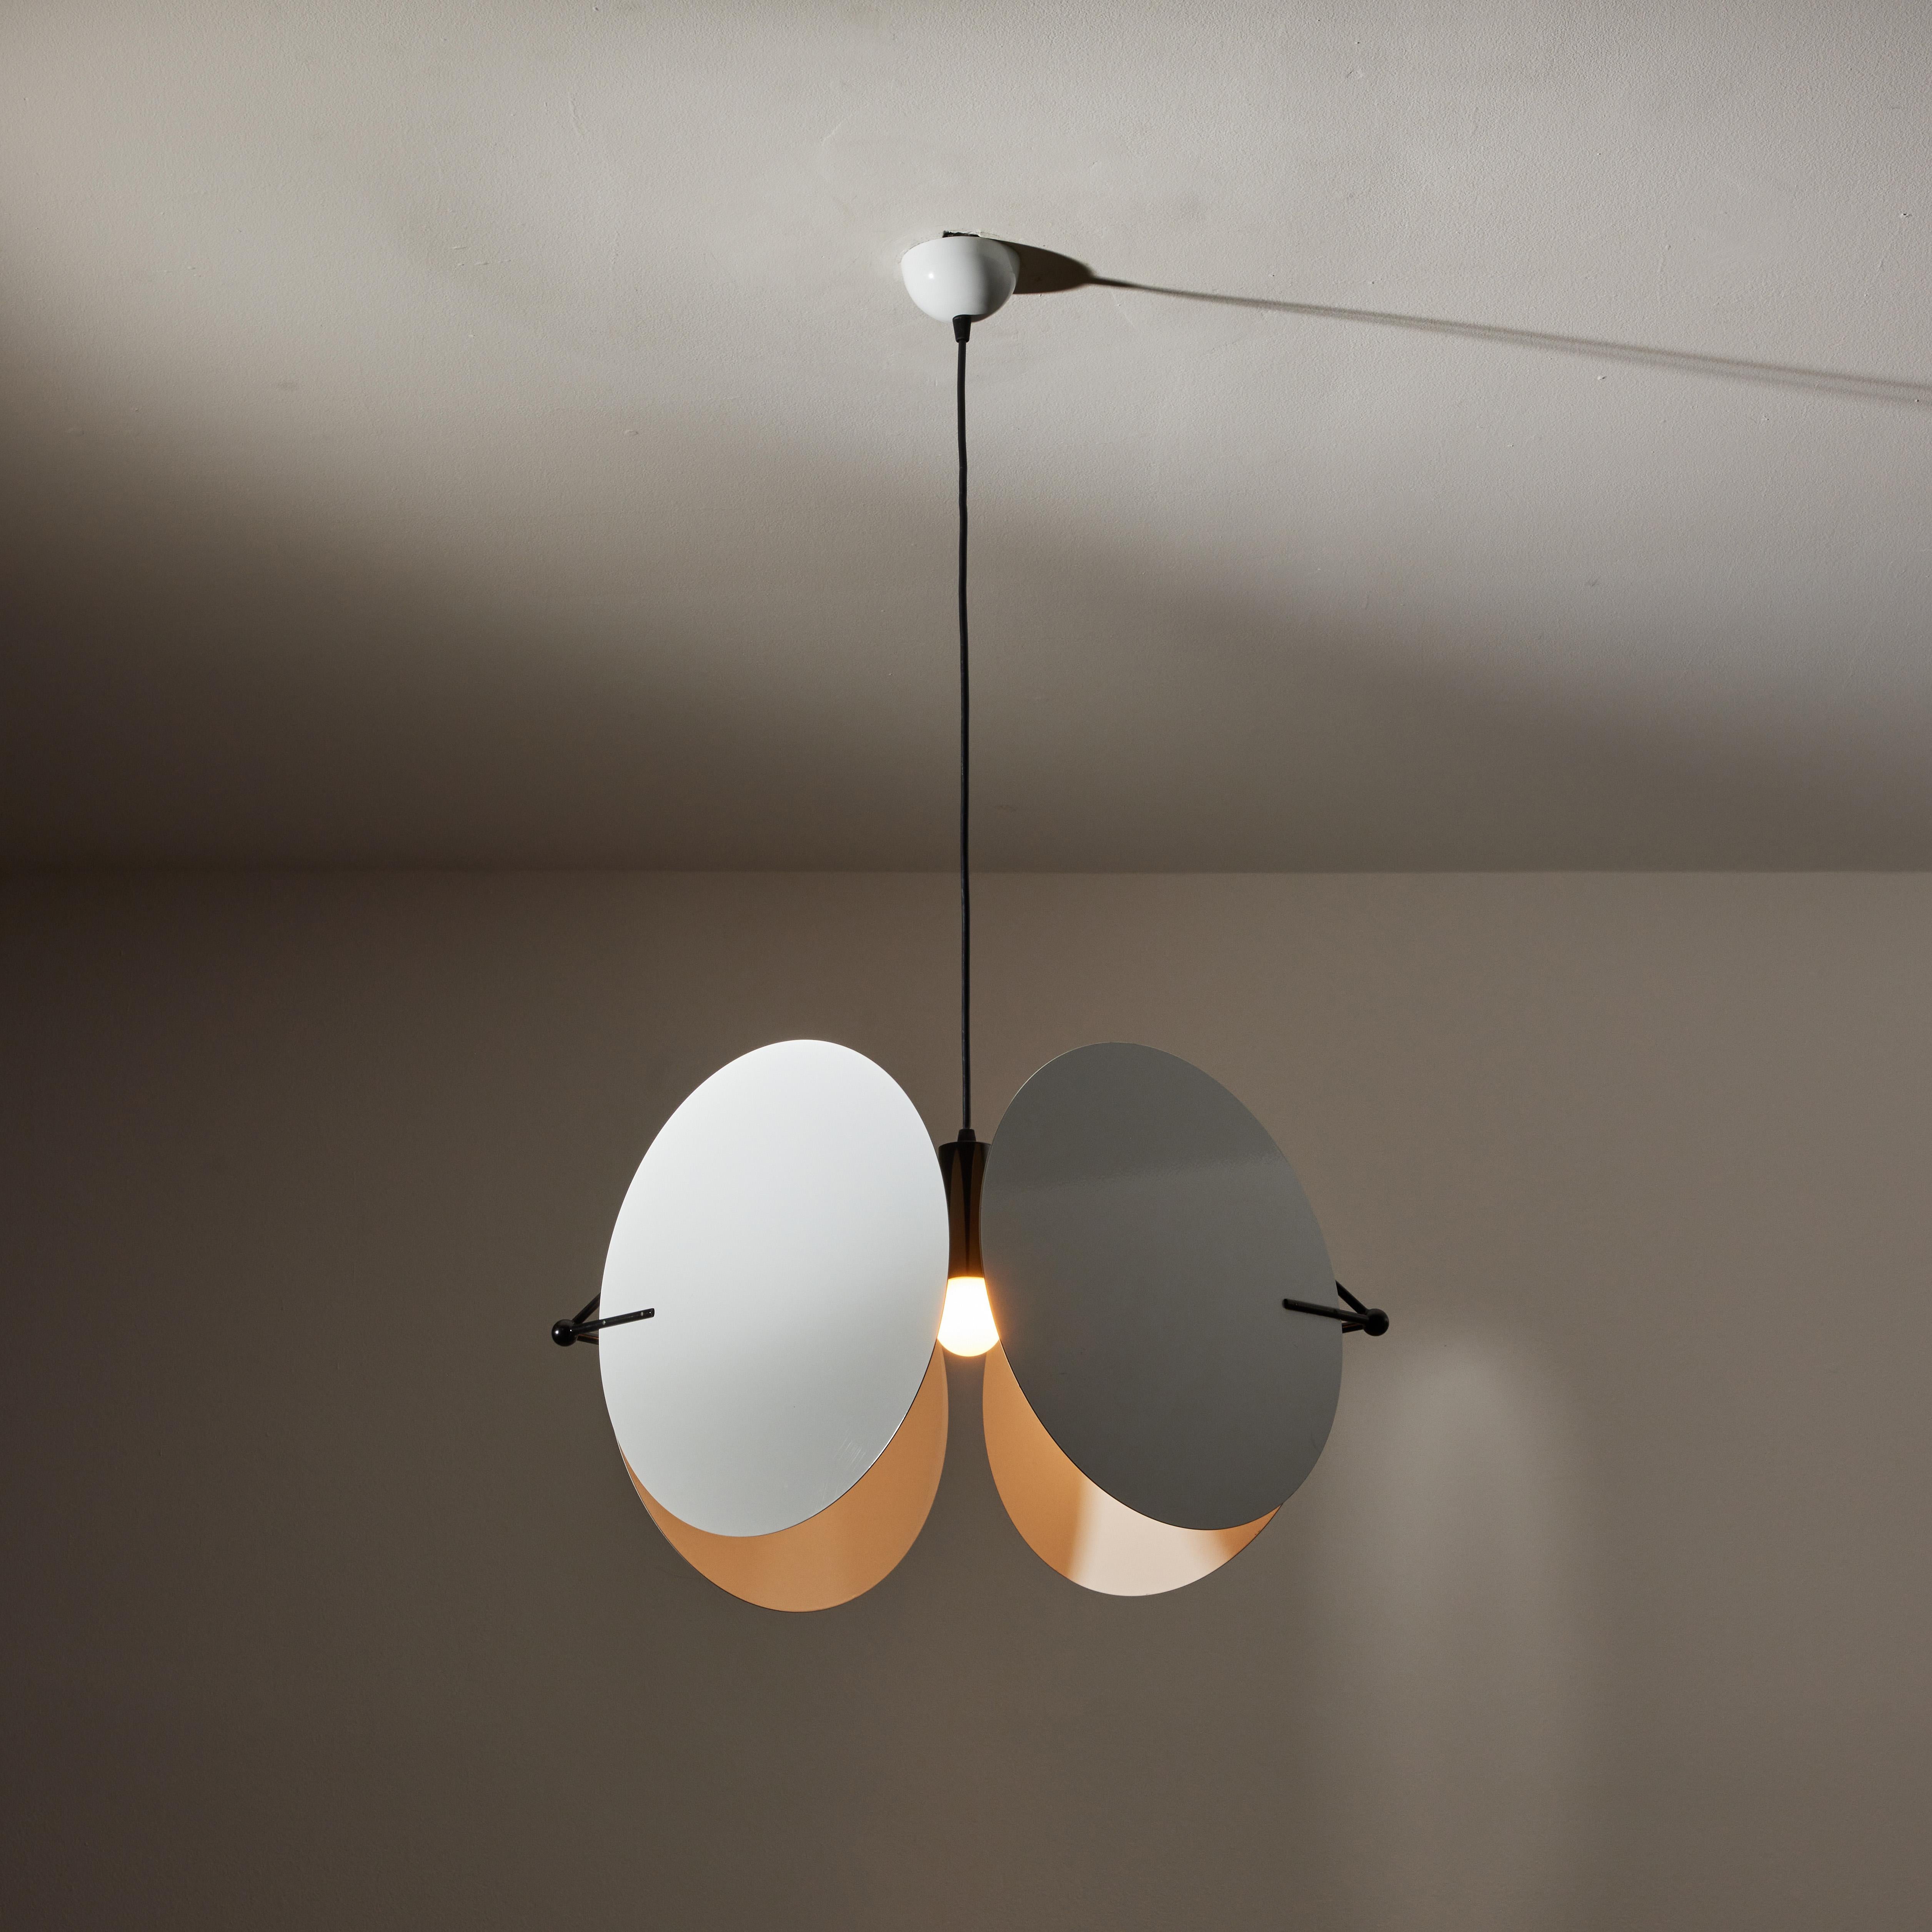 Kuta suspension light by Vico Magistretti for Oluce. Designed and manufactured in Italy, circa 1960's. Enameled metal. Rewired for U.S. standards. Original canopy. We recommend one E27 100w maximum bulb. Bulbs not included.